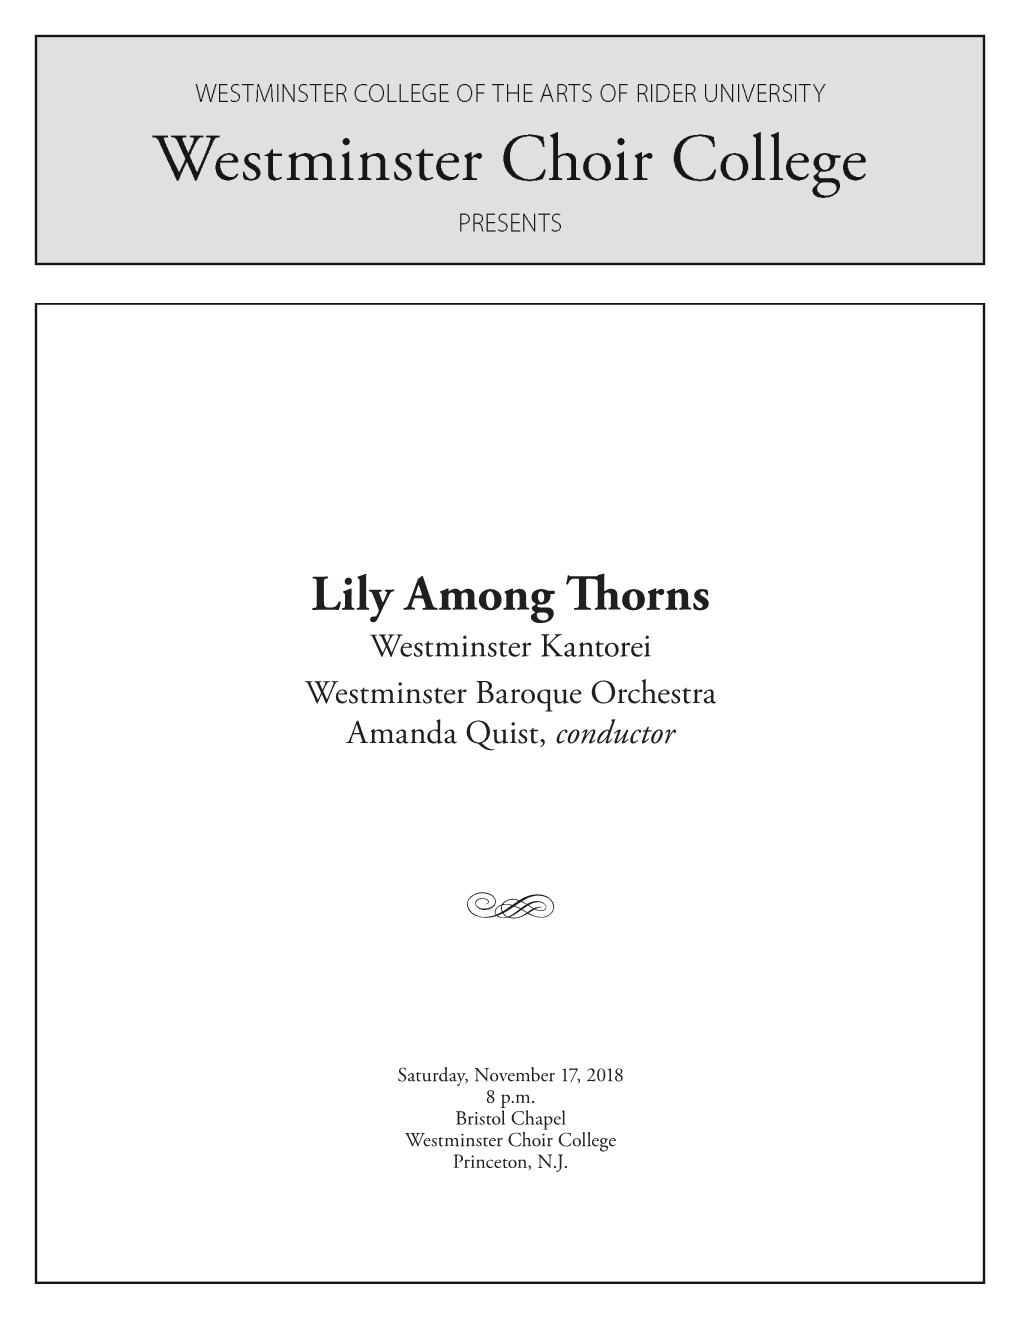 Lily Among Thorns Westminster Kantorei Westminster Baroque Orchestra Amanda Quist, Conductor